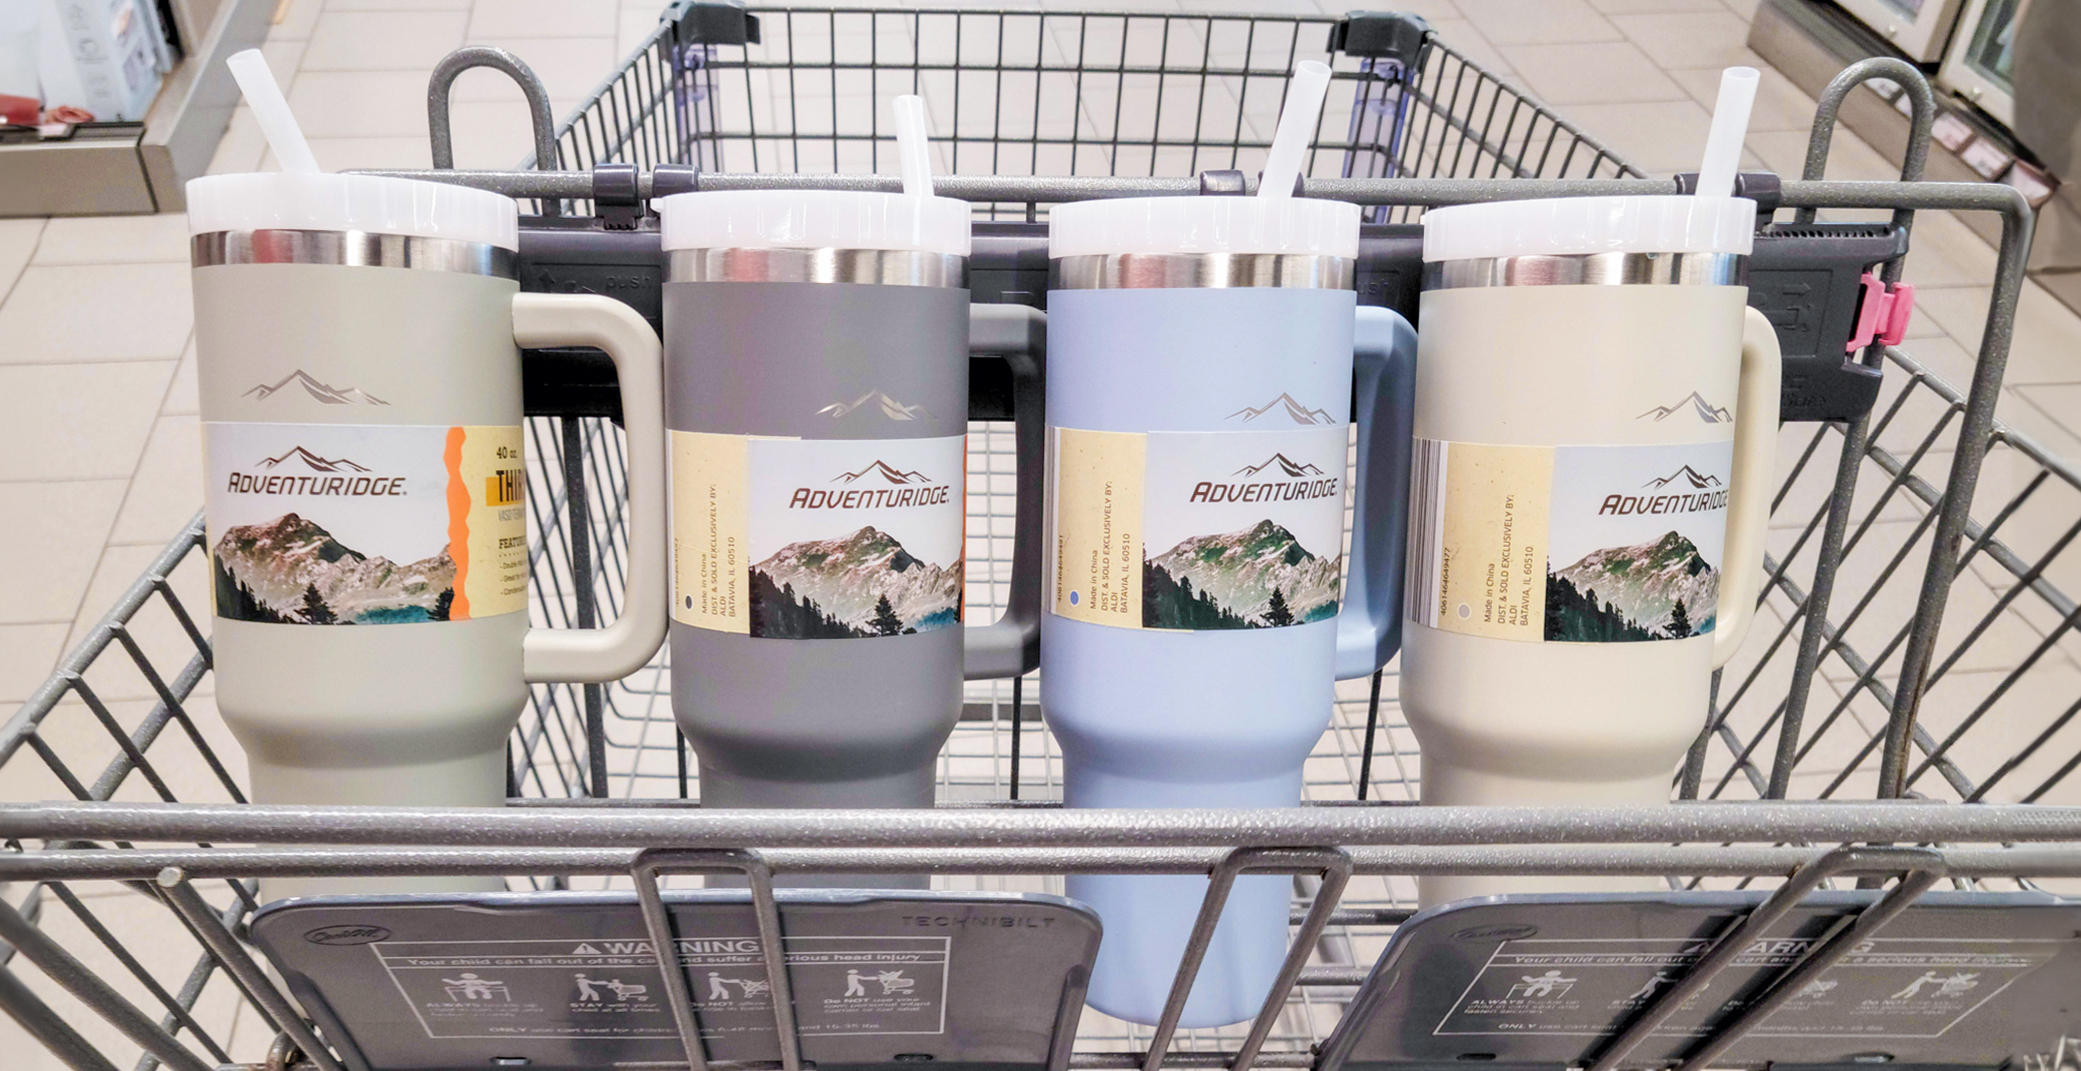 HURRY! ALDI Stanley Tumblers Lookalikes Only $9.99 + More